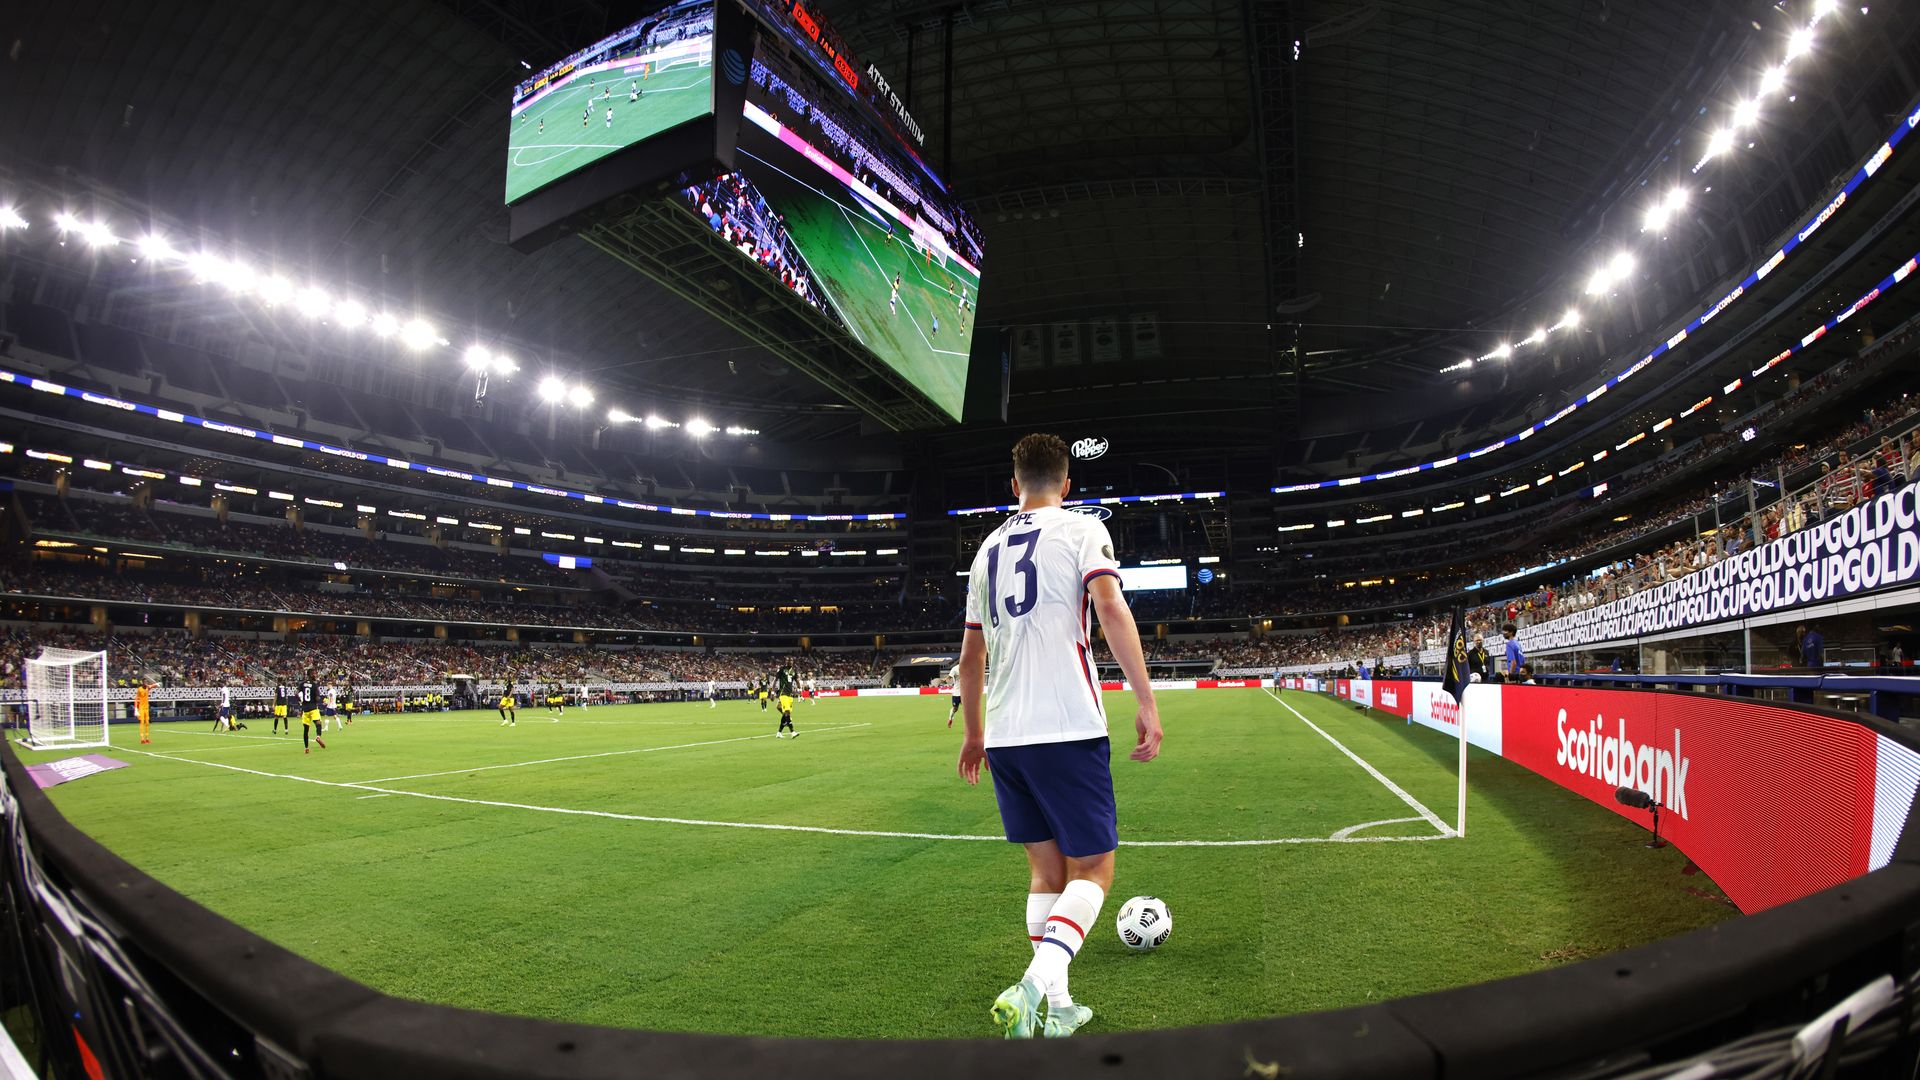 An American soccer player, wearing a white jersey, lines up for a corner kick under a large jumbotron.